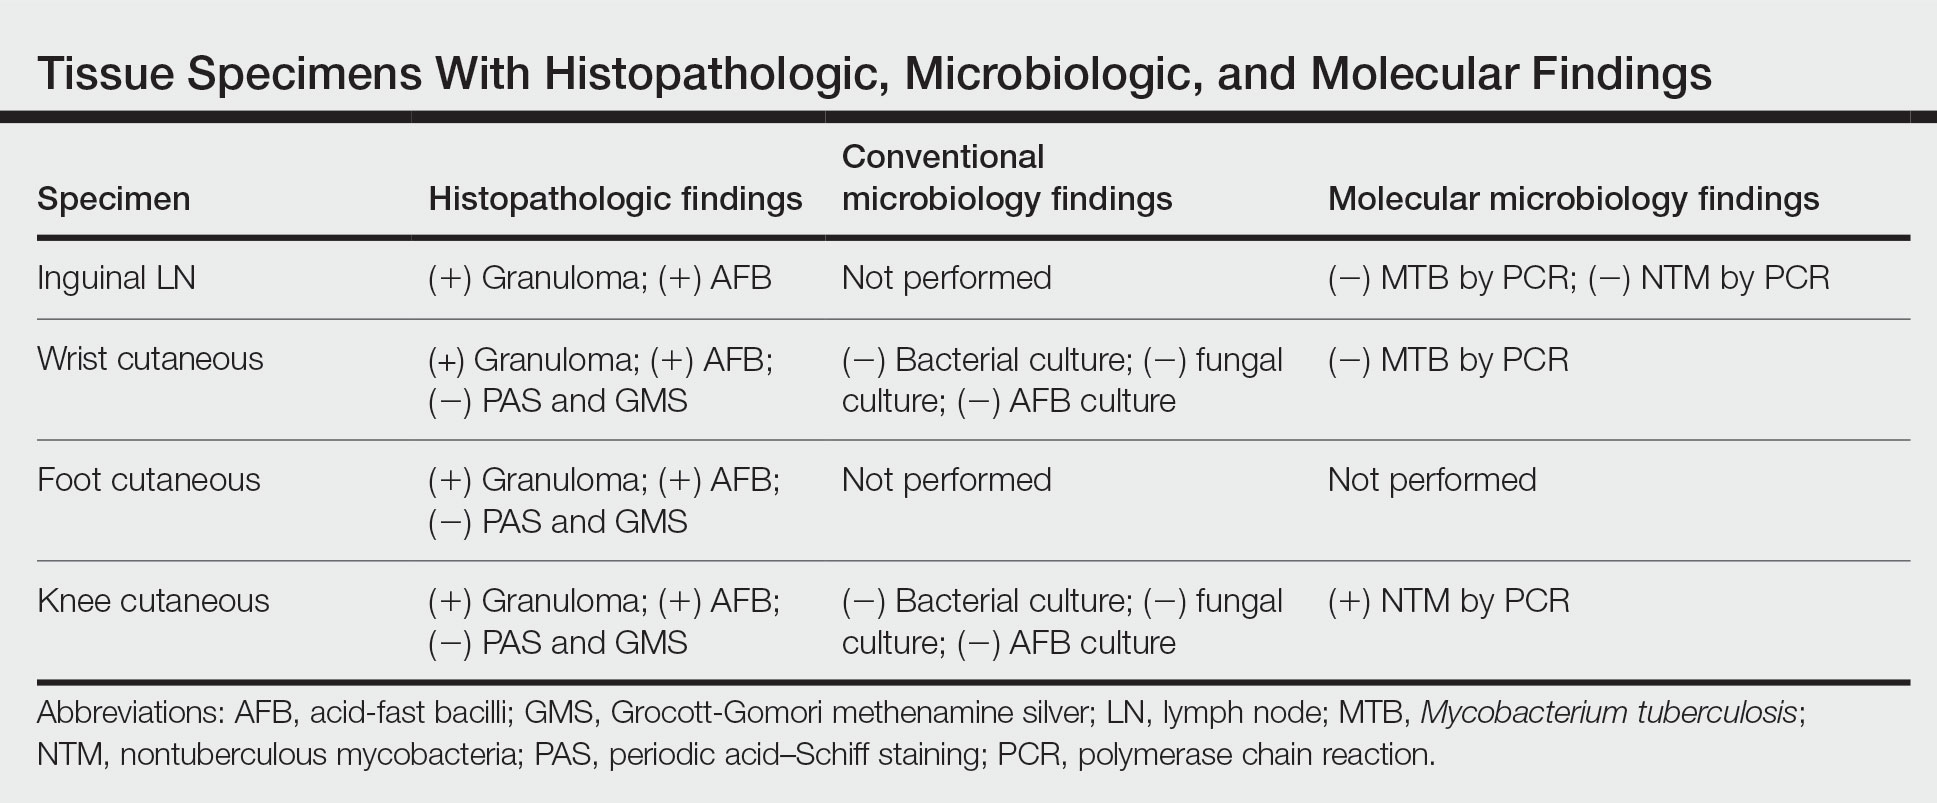 Tissue Specimens With Histopathologic, Microbiologic, and Molecular Findings